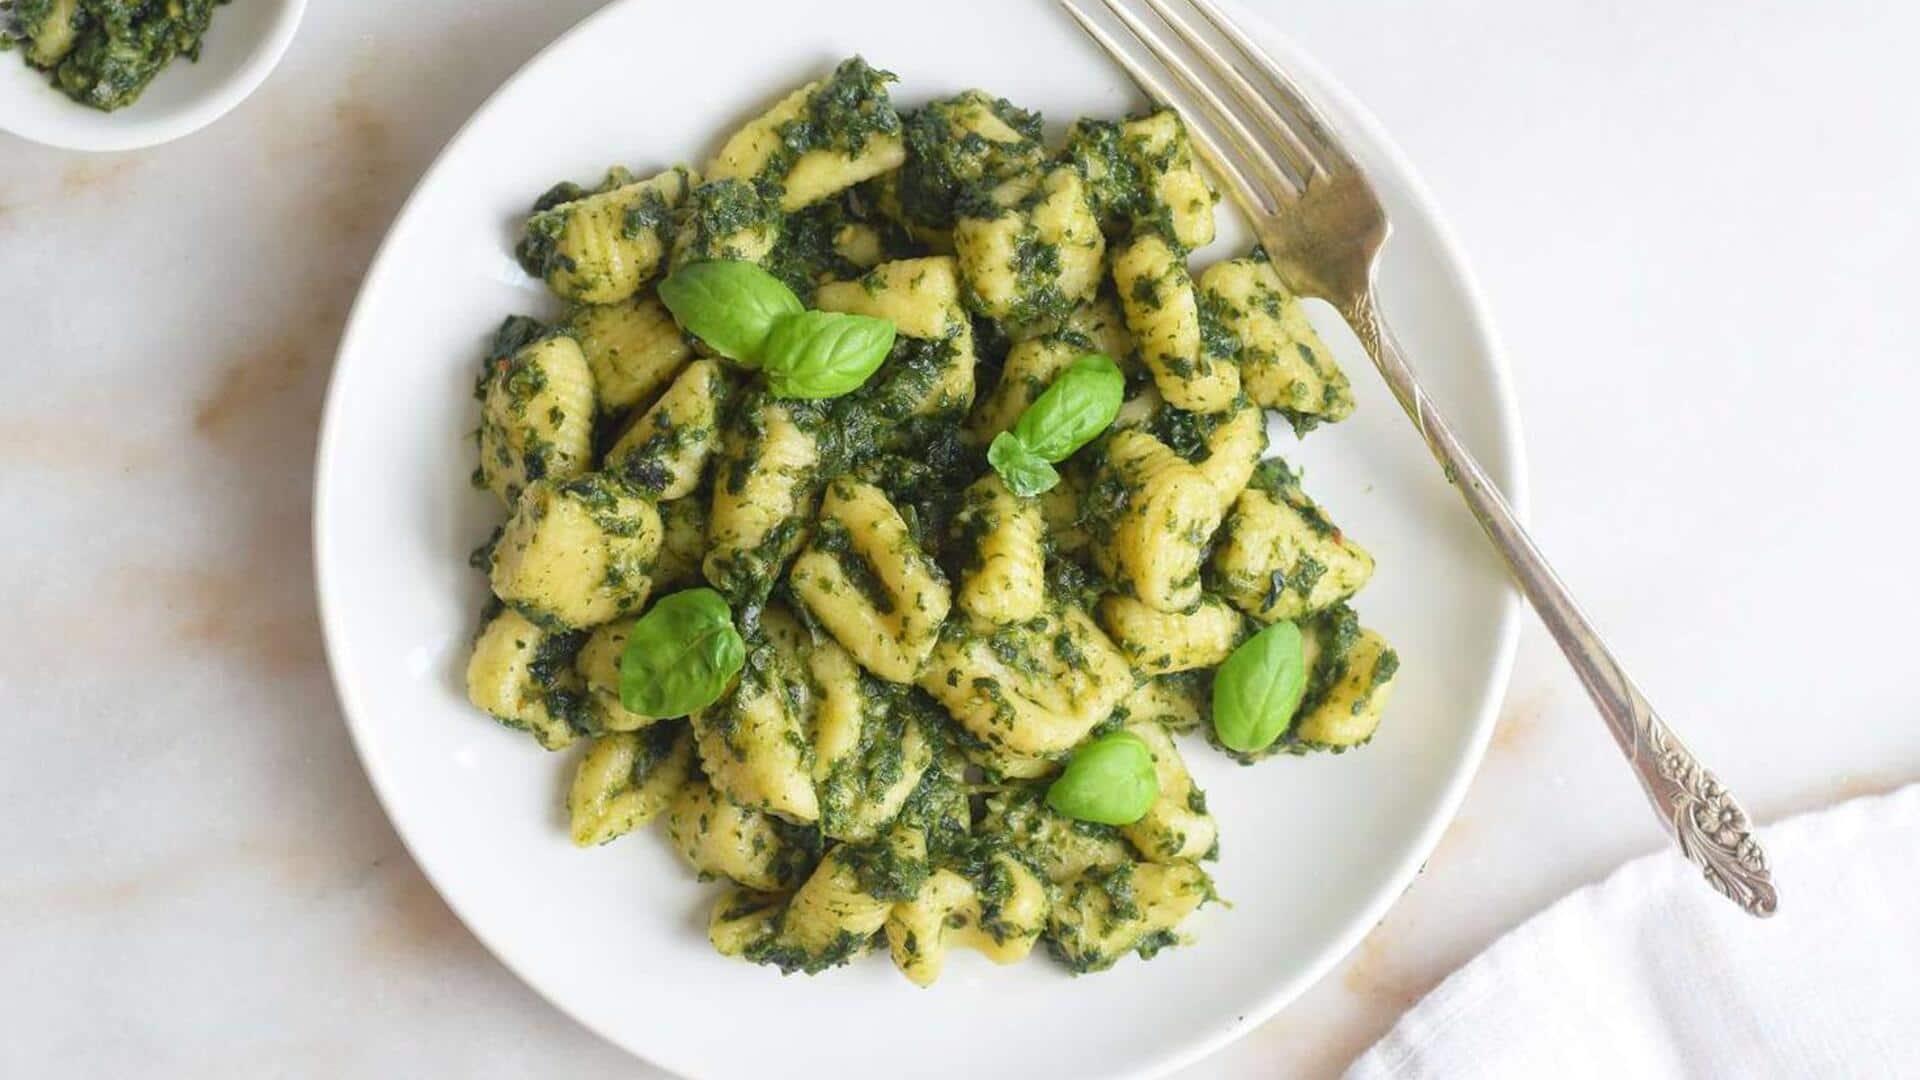 Recipe: Cook eggless spinach gnocchi in 4 simple steps